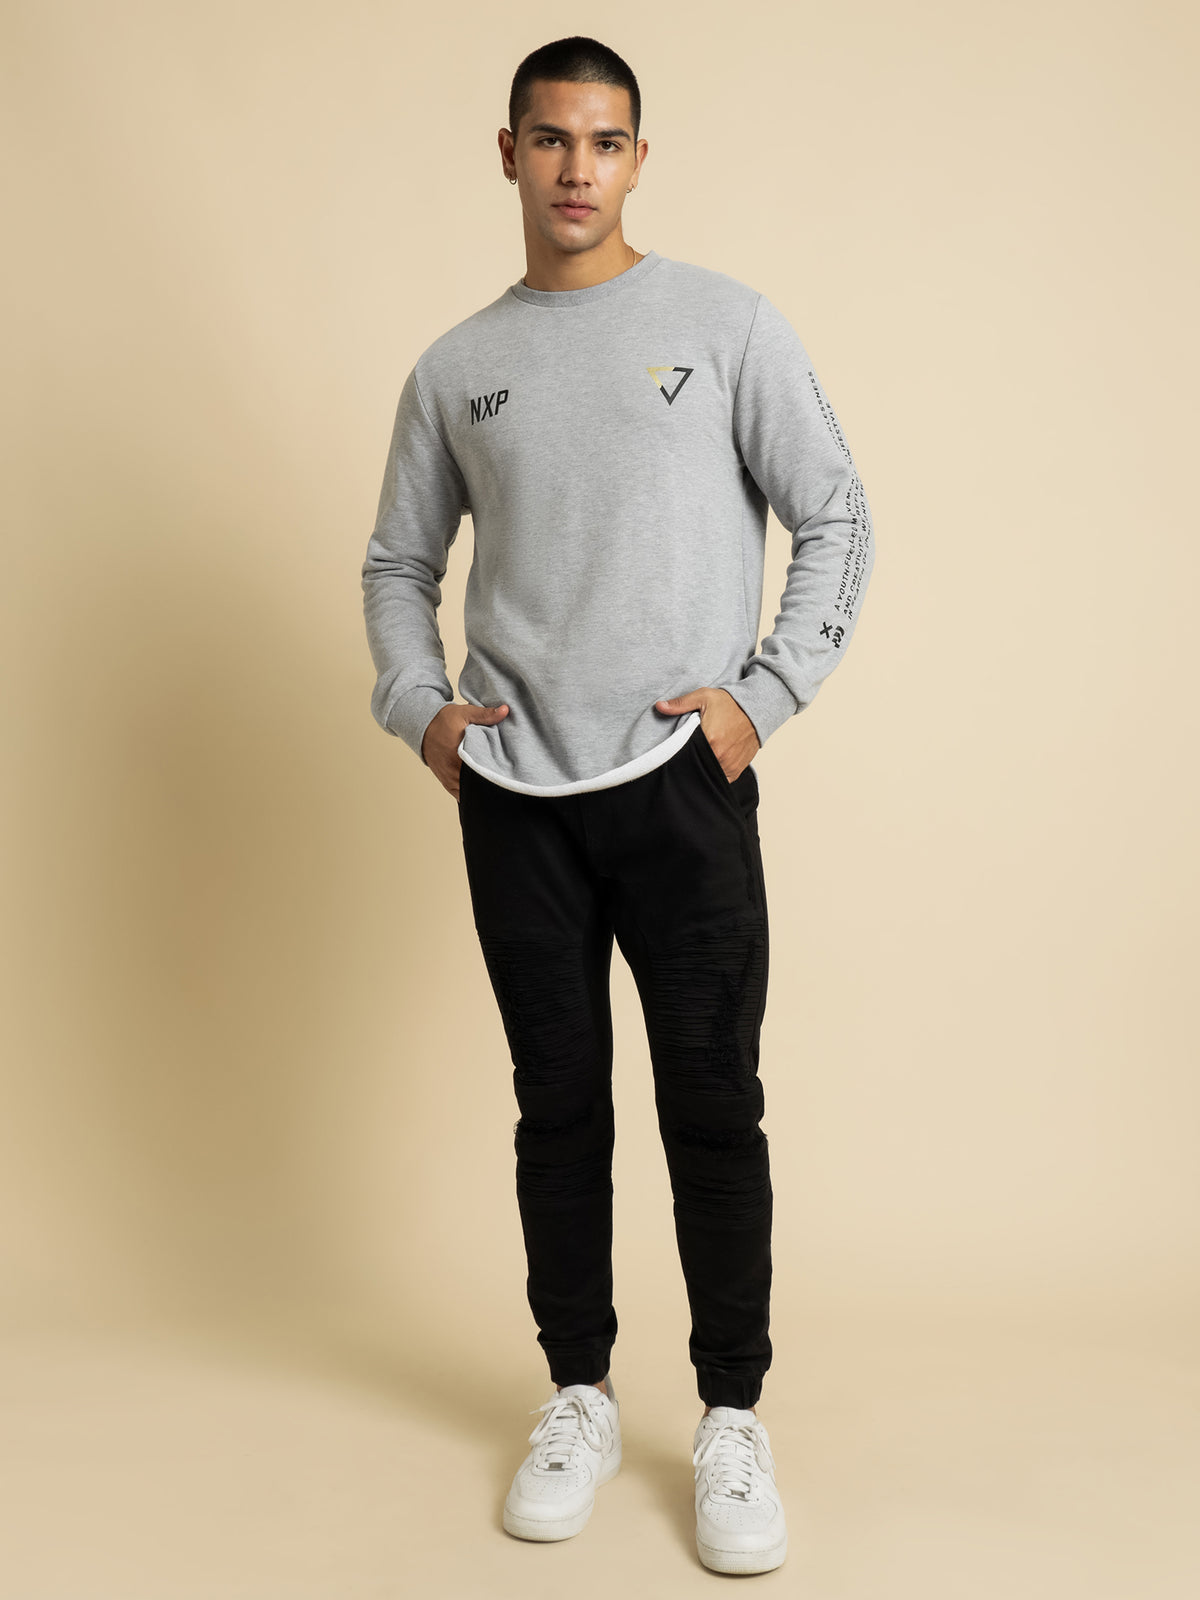 Search For Freedom Dual Curved Sweater in Grey Marle